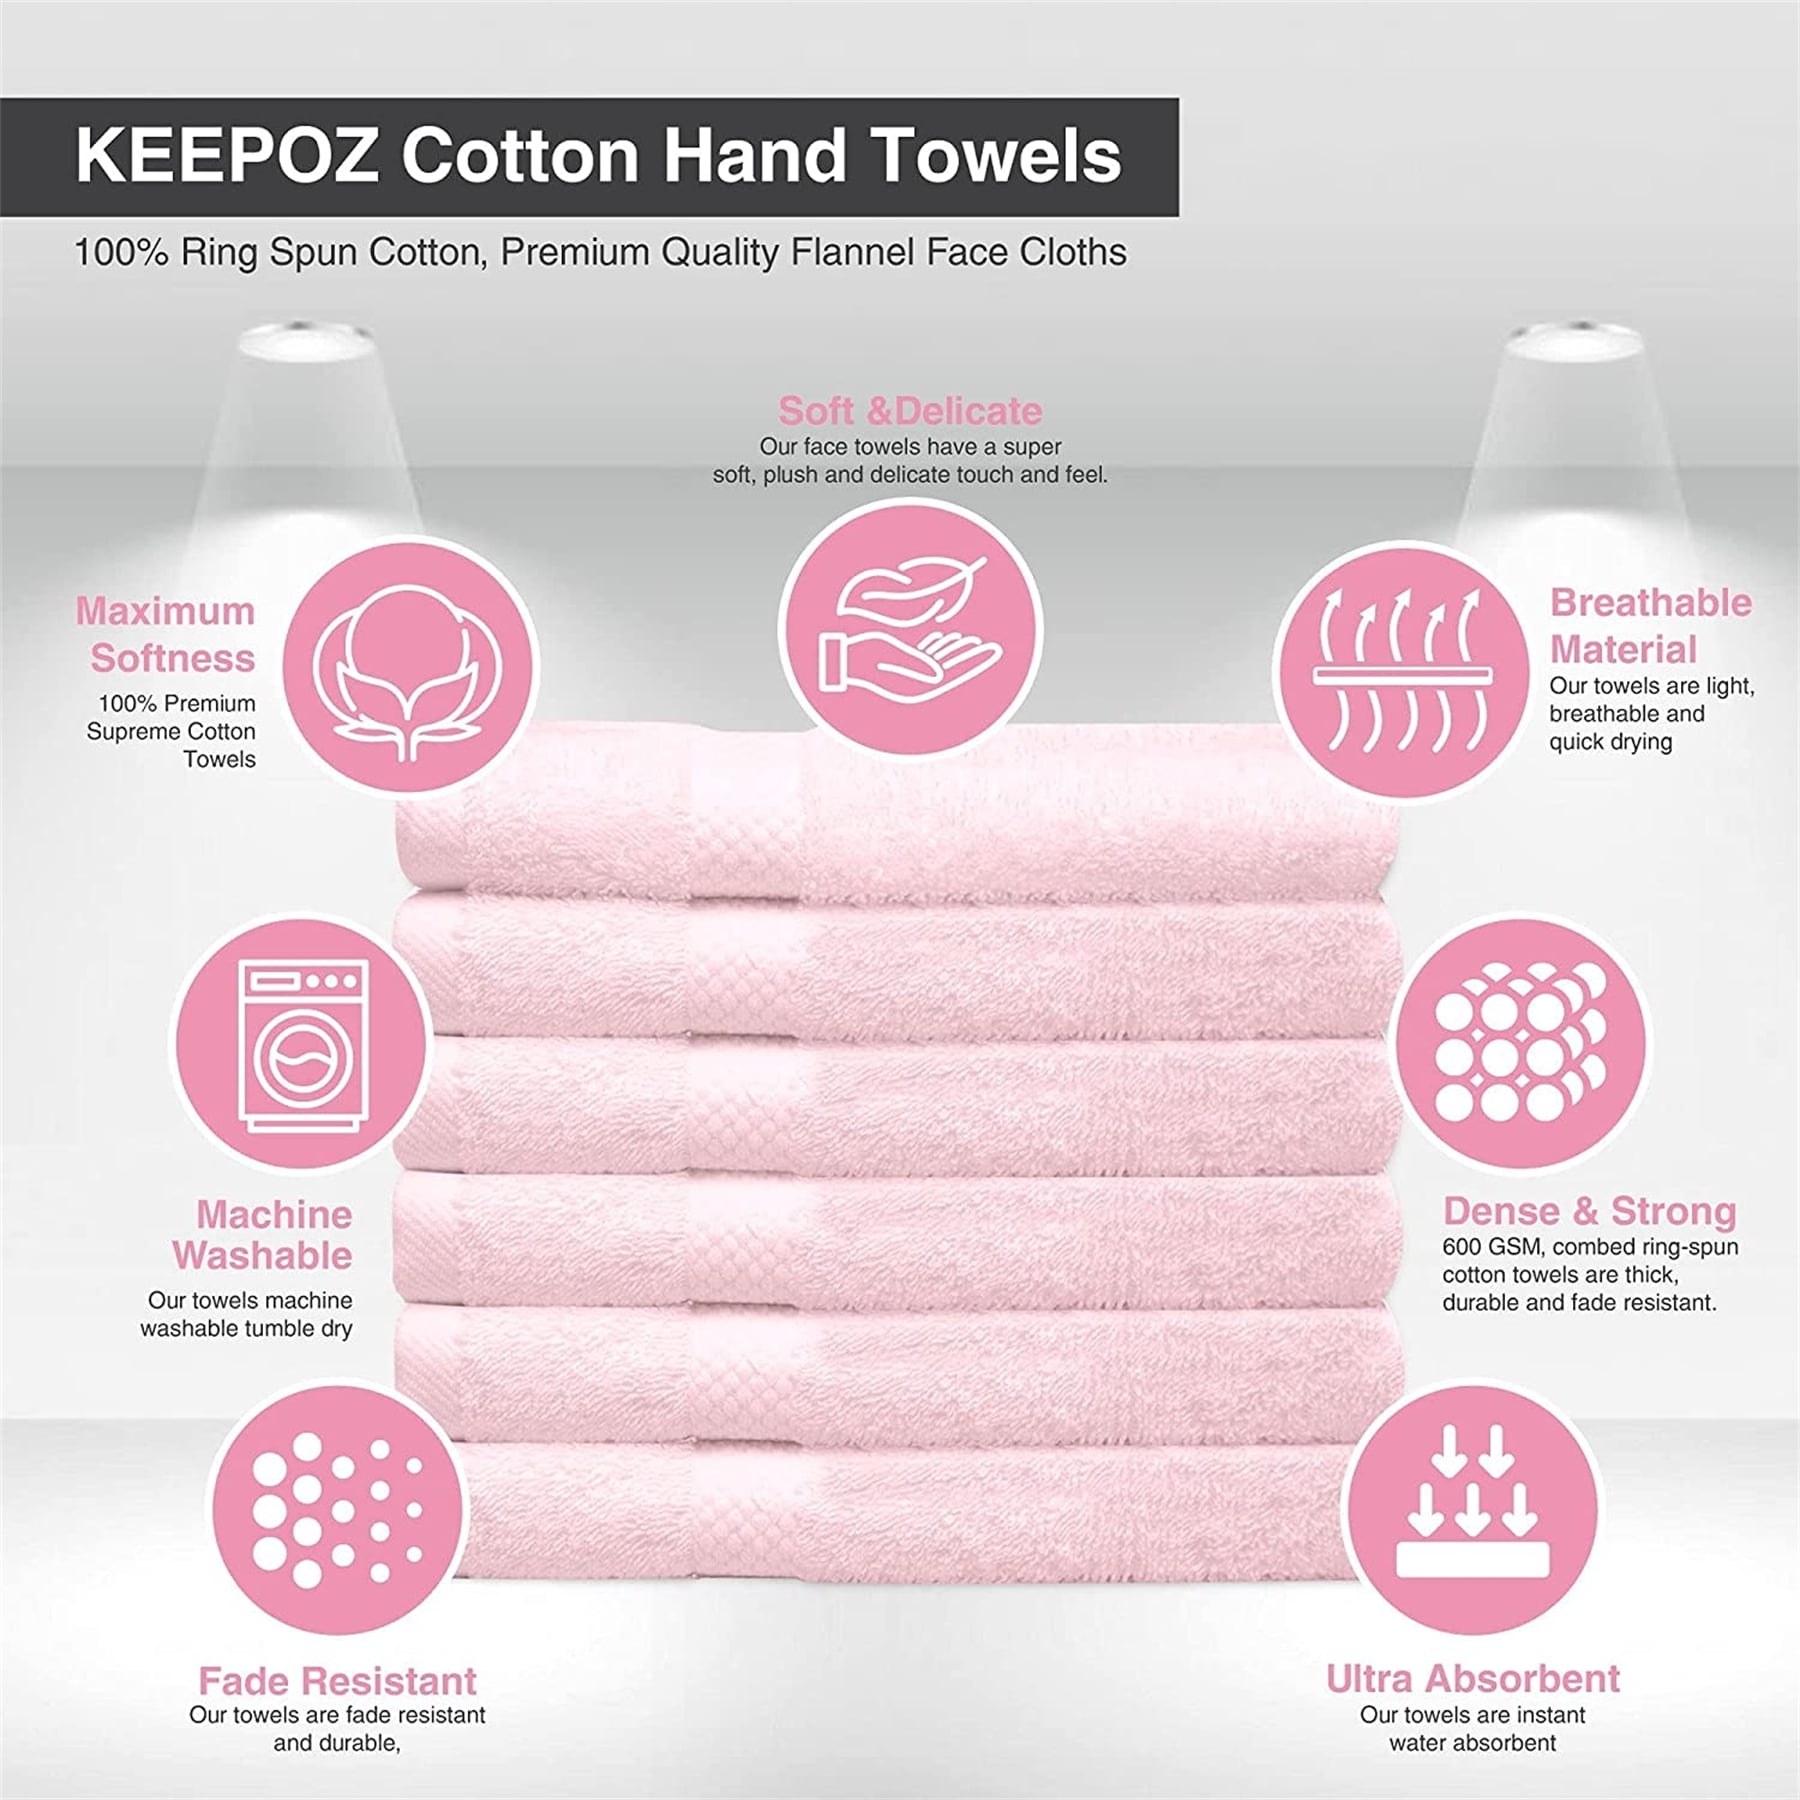 Kaufman - Premium Hand Towels Set for Bathroom, Spa, Gym, and Face Towel 100% Cotton Ring SPUN, Ultra Soft Feel and Highly Absorbent Towels (Set of 6)